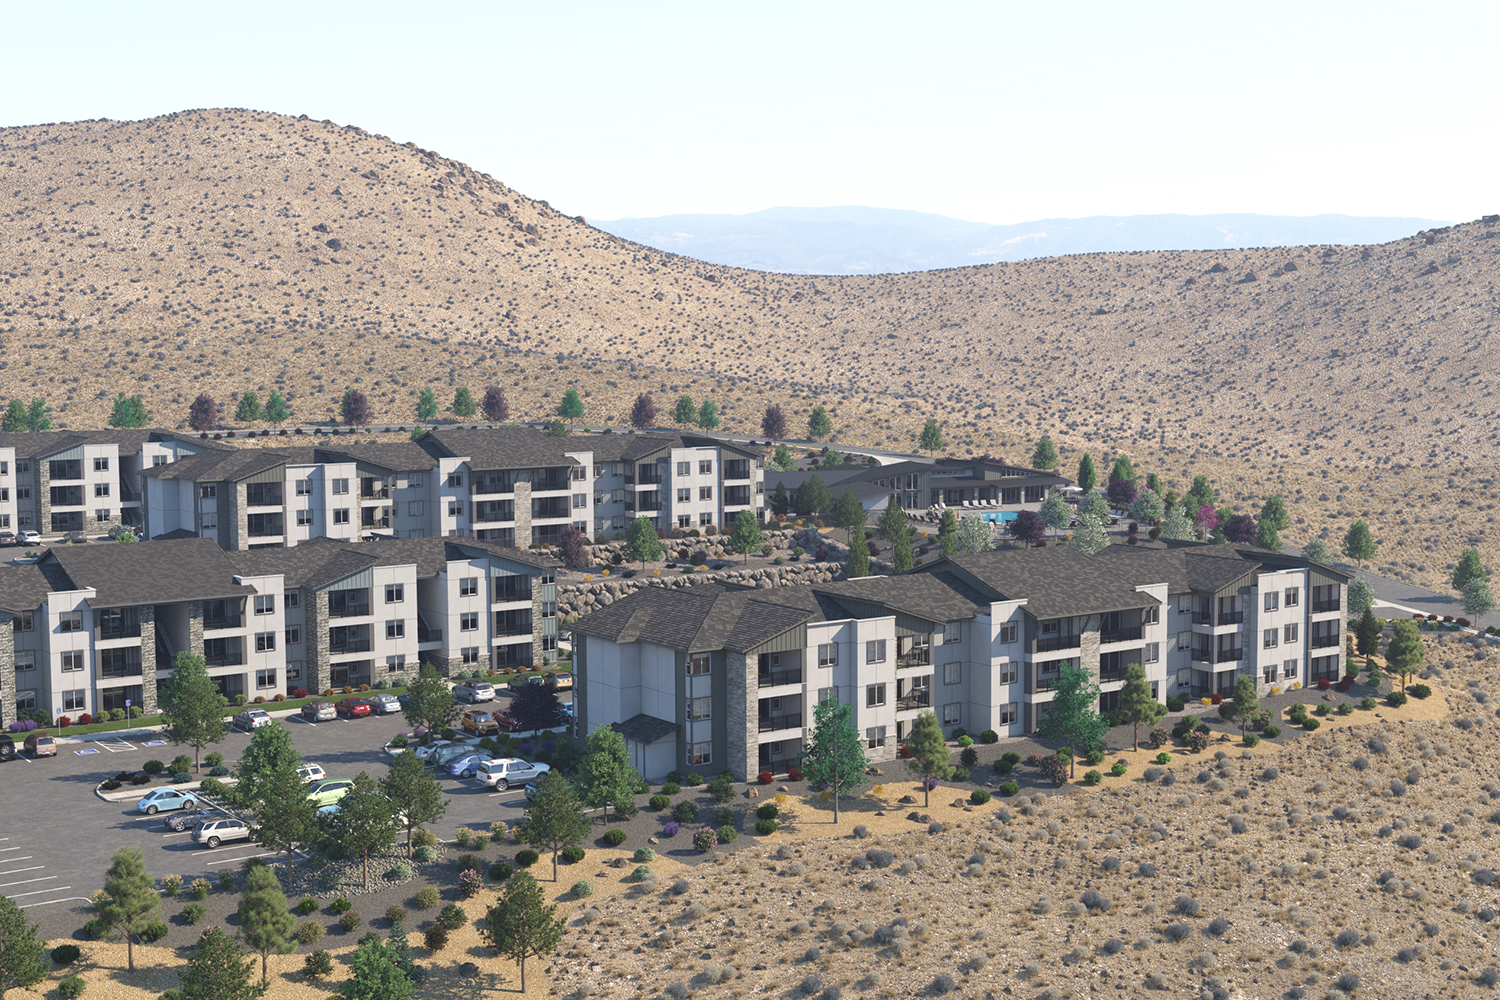 The Overlook at Keystone Canyon Apartments - Reno NV - Overview of Apartment Buildings